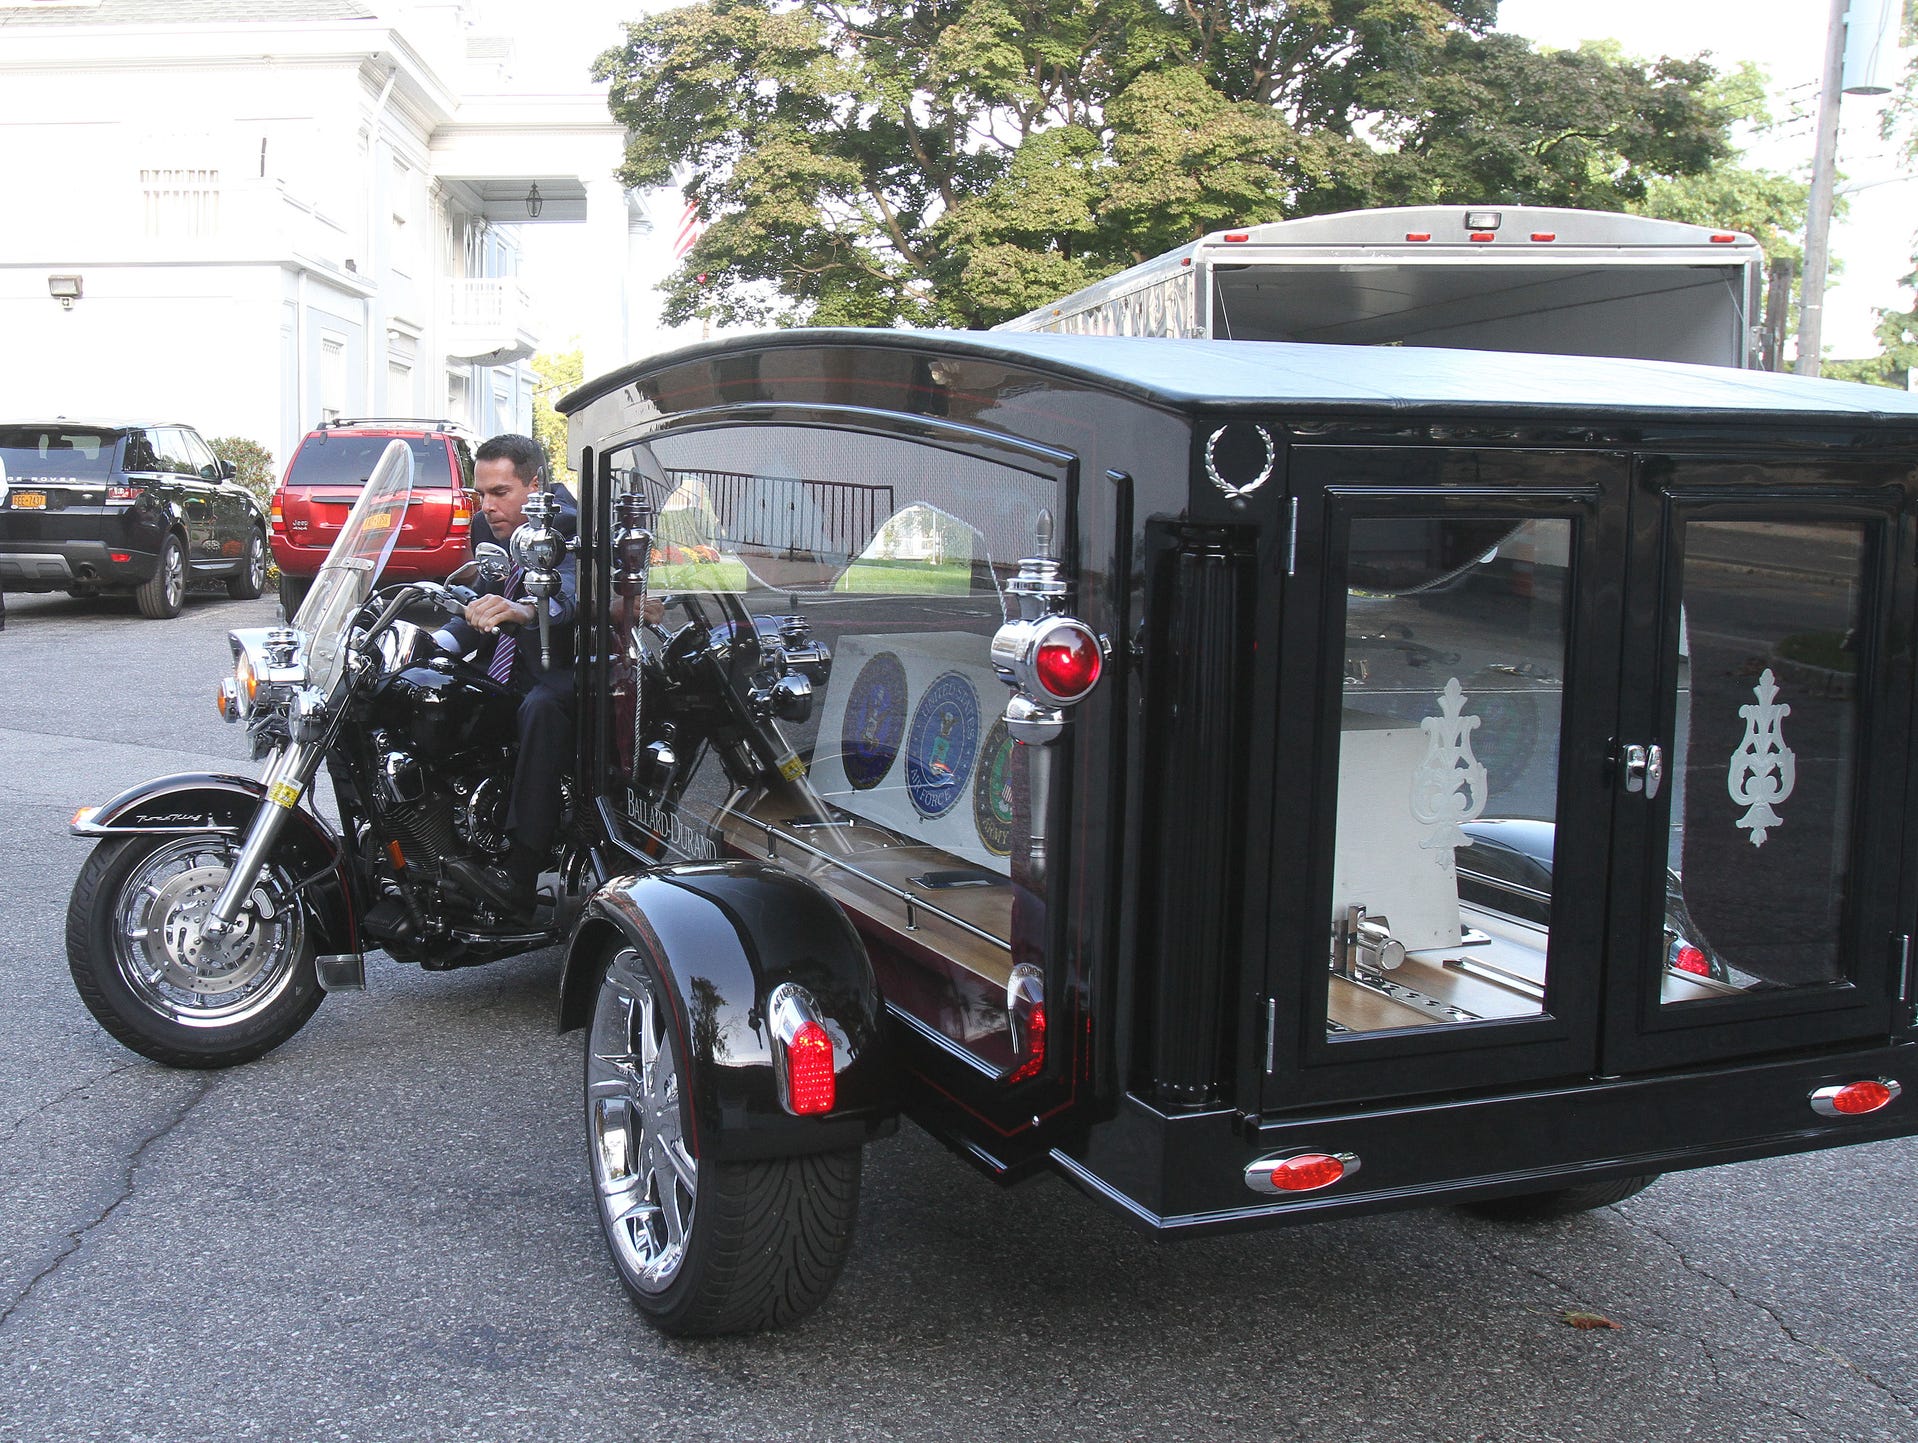 Motorcycle hearse available for that final ride